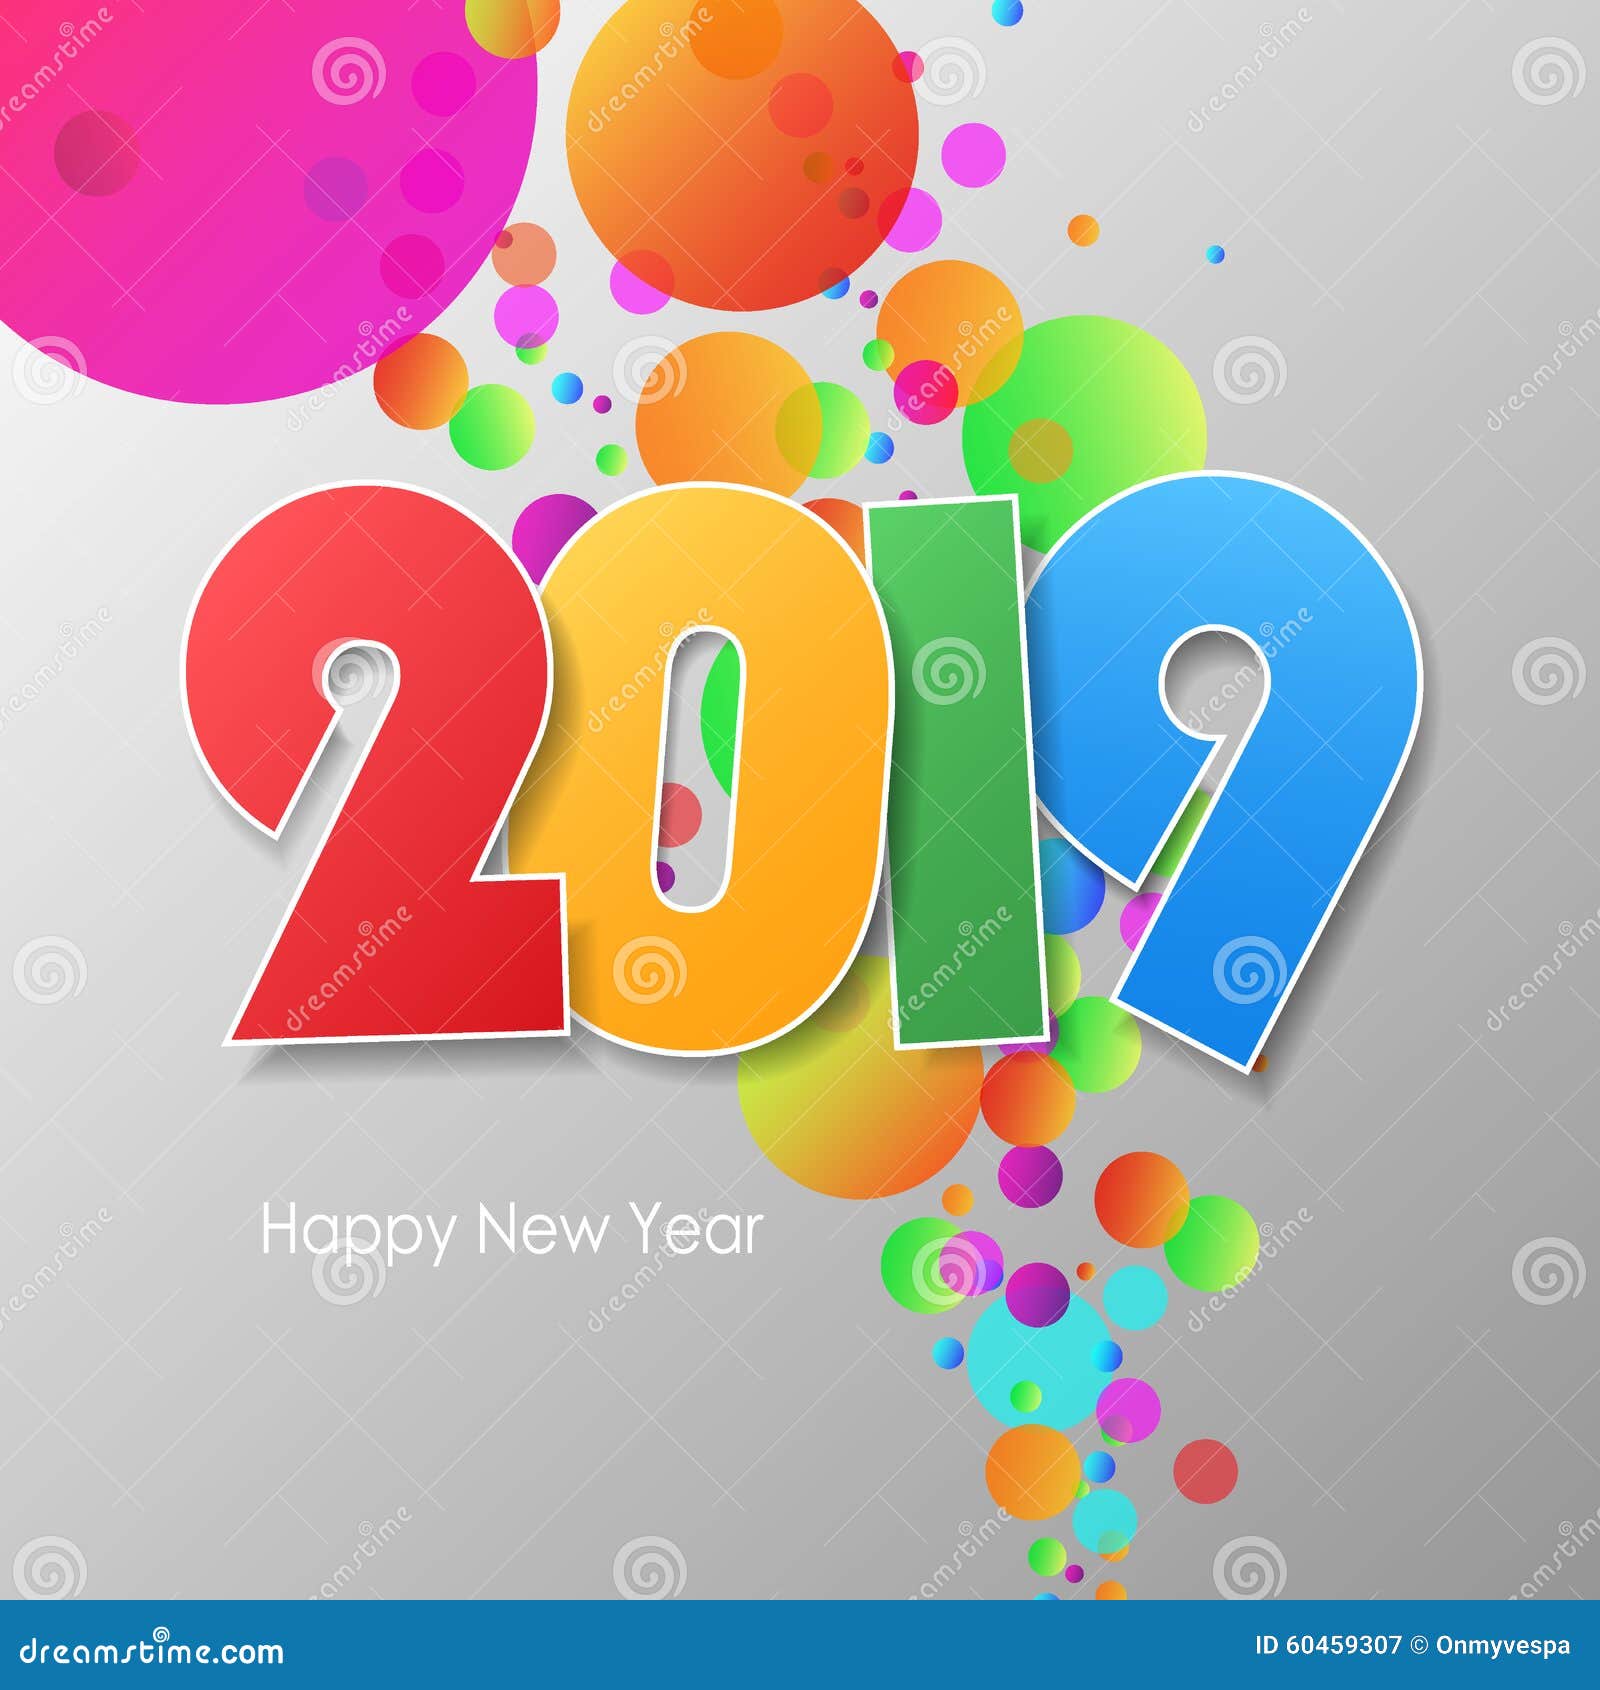 Simple Greeting Card Happy New Year 2019. Stock Vector  Illustration of label, card: 60459307